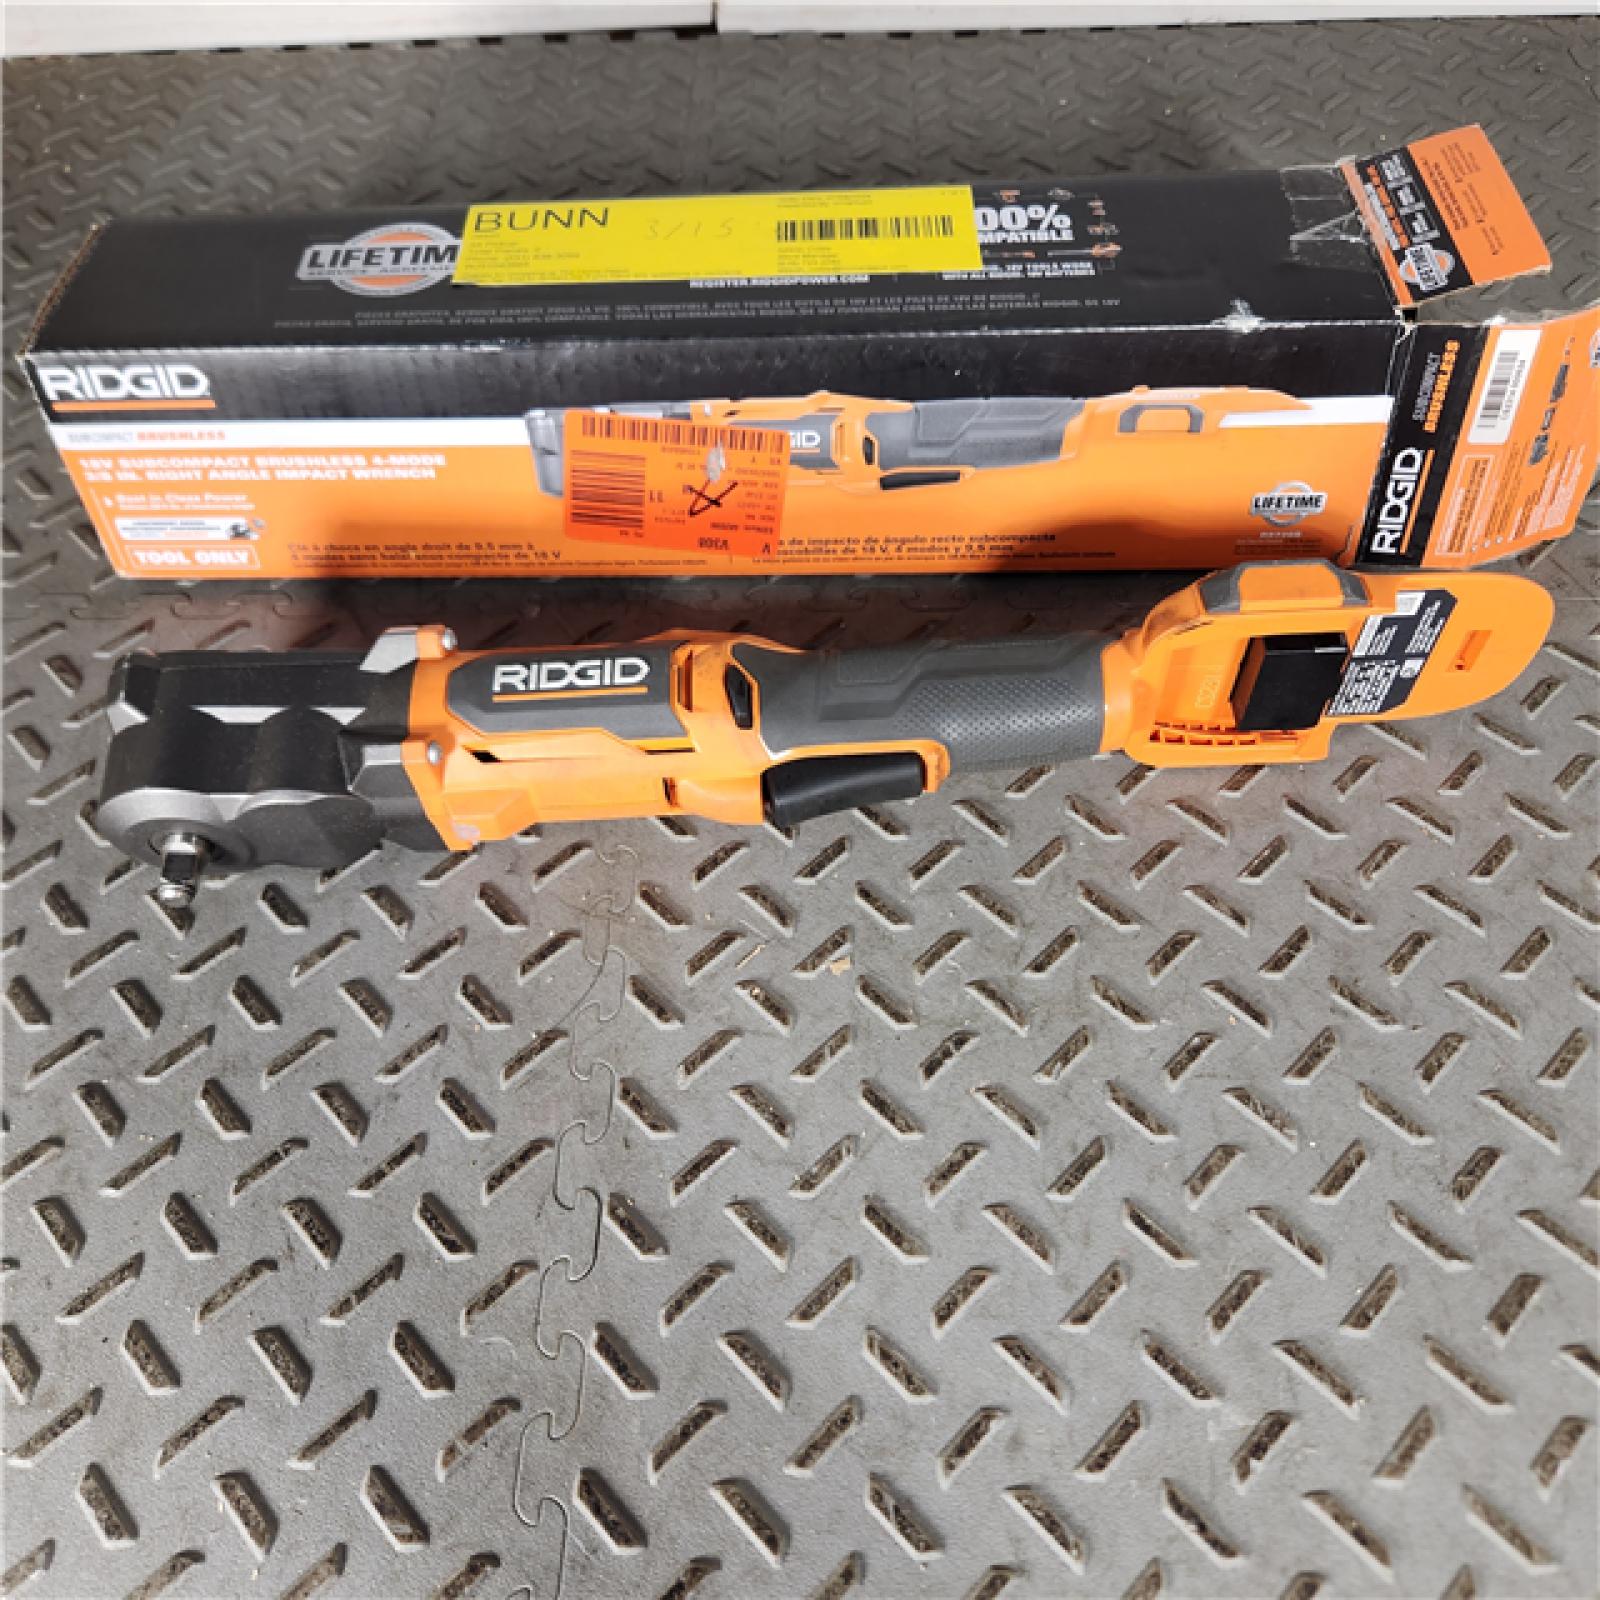 Houston Location - AS-IS RIDGID 18V SubCompact Brushless 3/8 in. Right Angle Impact Wrench (Tool Only) - Appears IN GOOD Condition